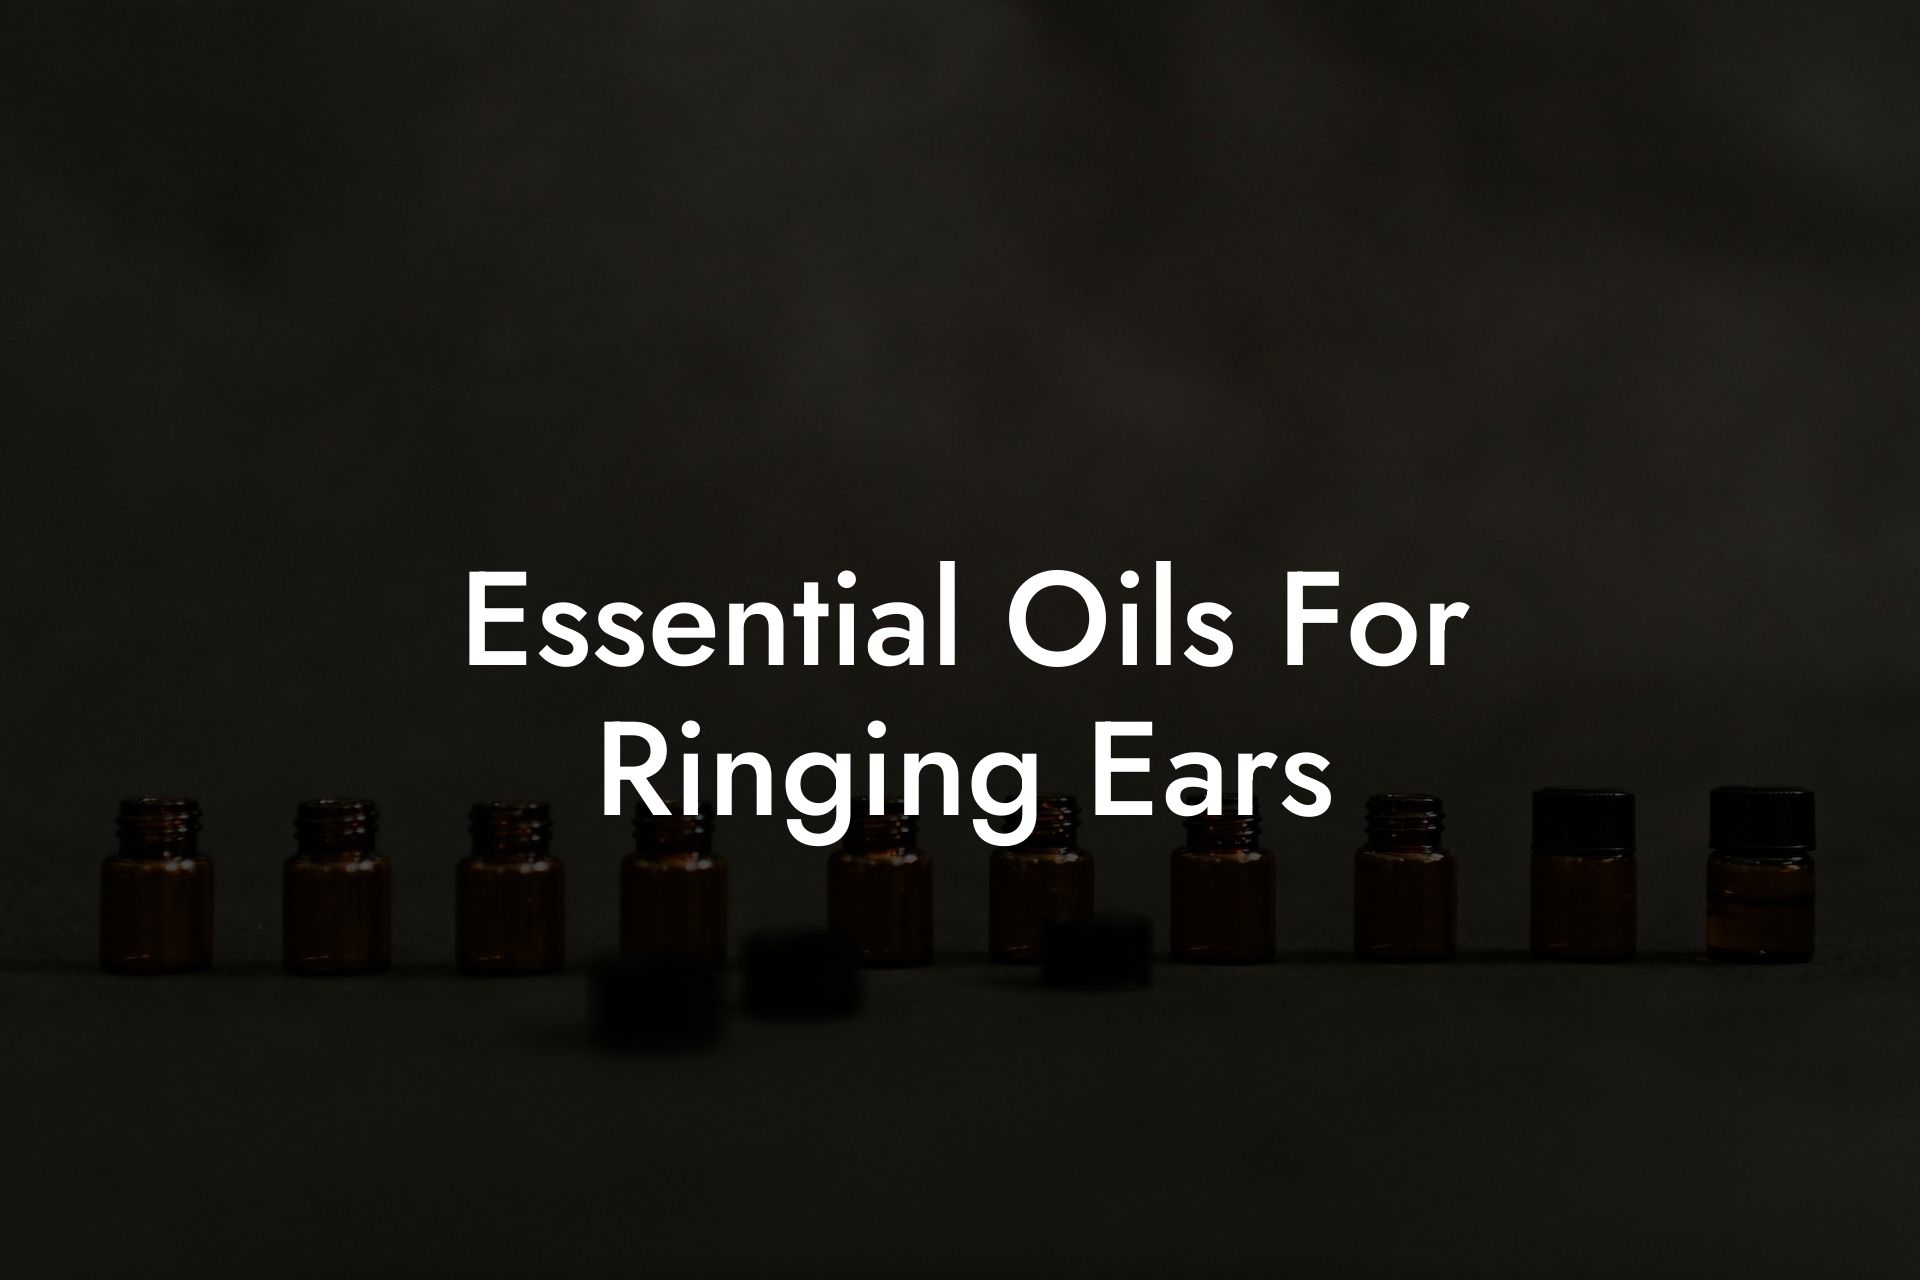 Essential Oils For Ringing Ears